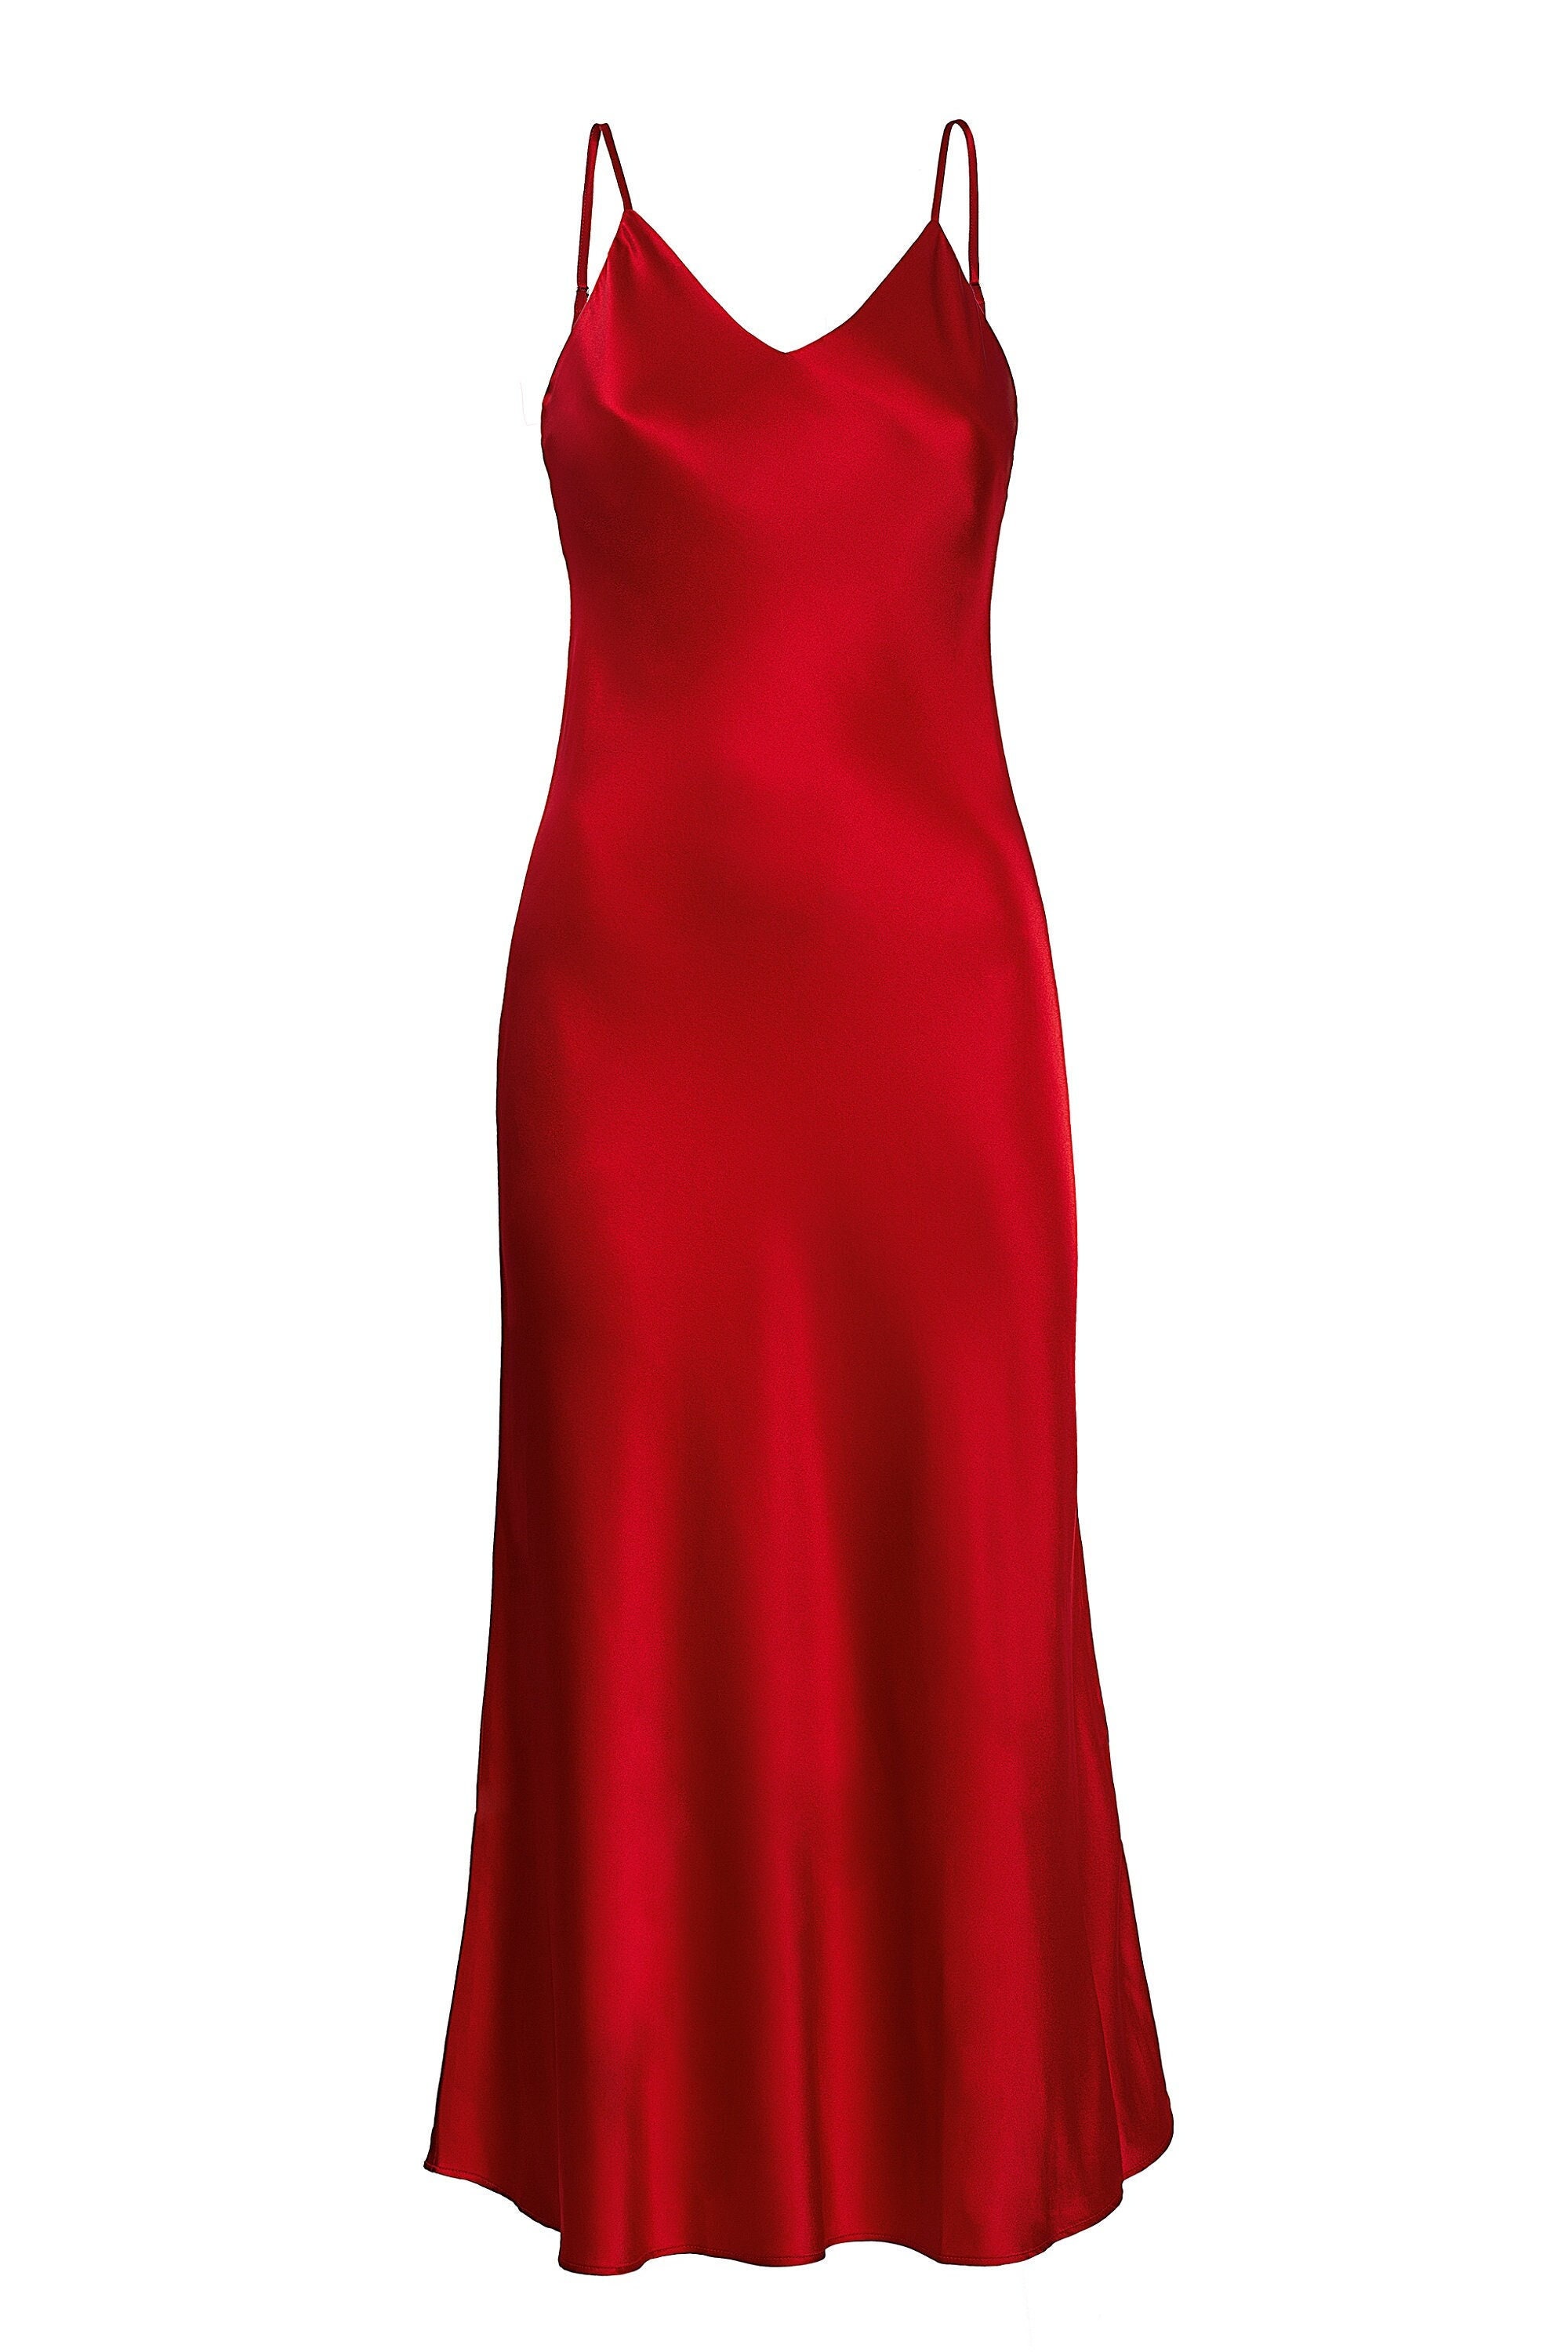 ROBE SEXY ROUGE PR7042 – PROVOCATIVE FRANCE